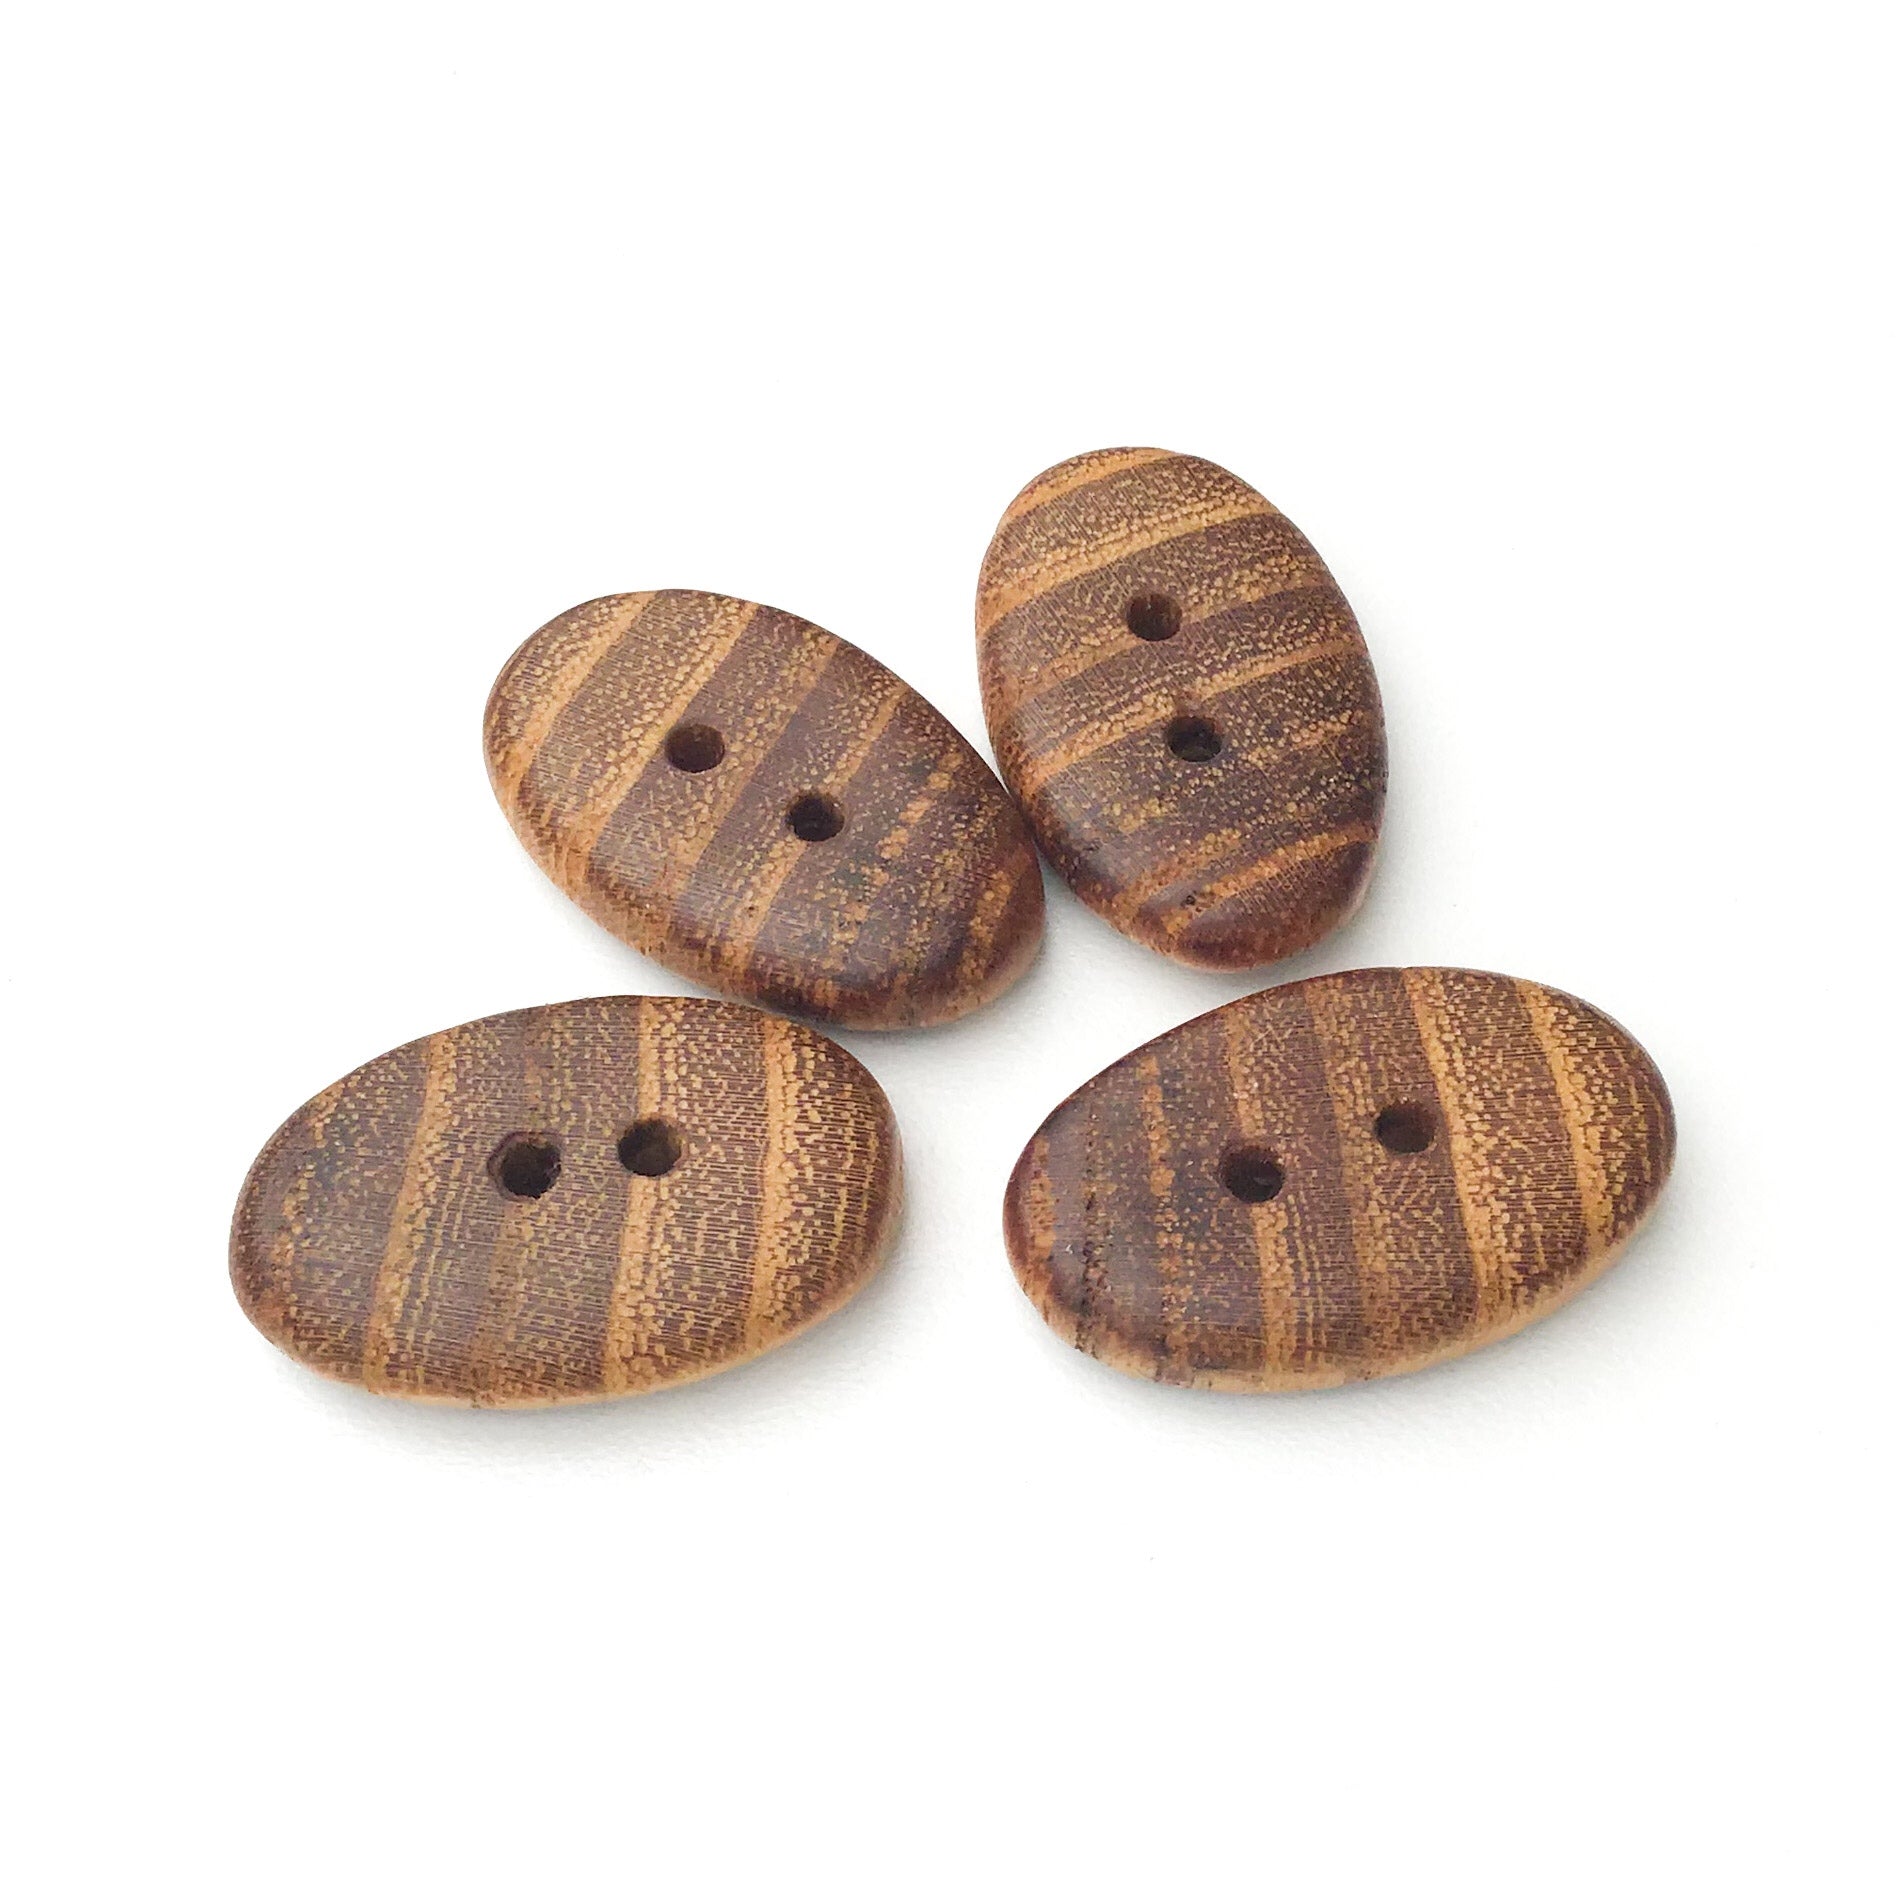 Black Locust Wood Buttons - Wooden Toggle Buttons - 3/4 X 1 3/16 - 4 Pack